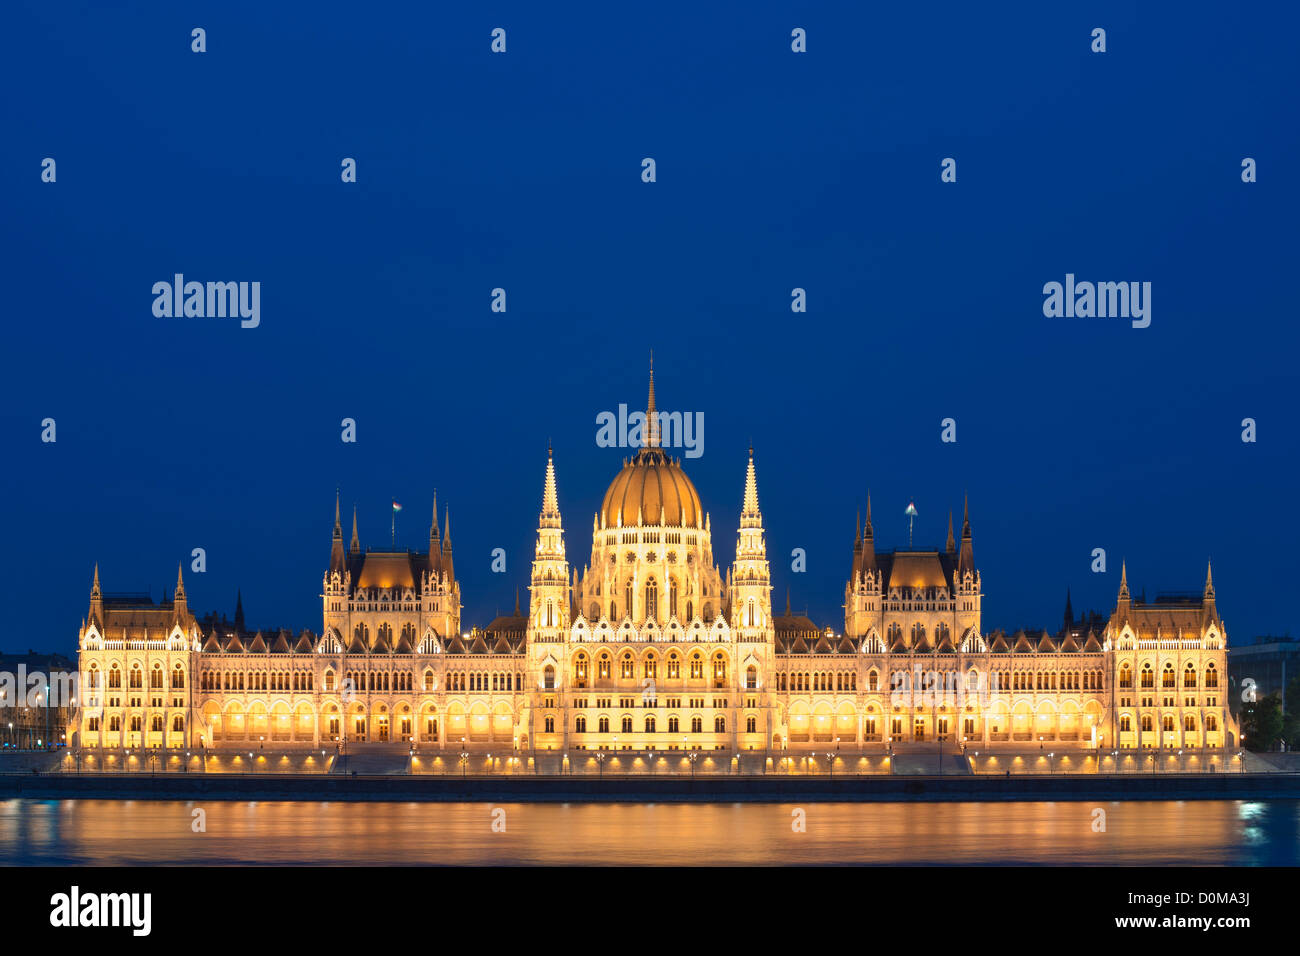 Night view of the Hungarian Parliament Building on the banks of the Danube River in Budapest, the capital of Hungary. Stock Photo